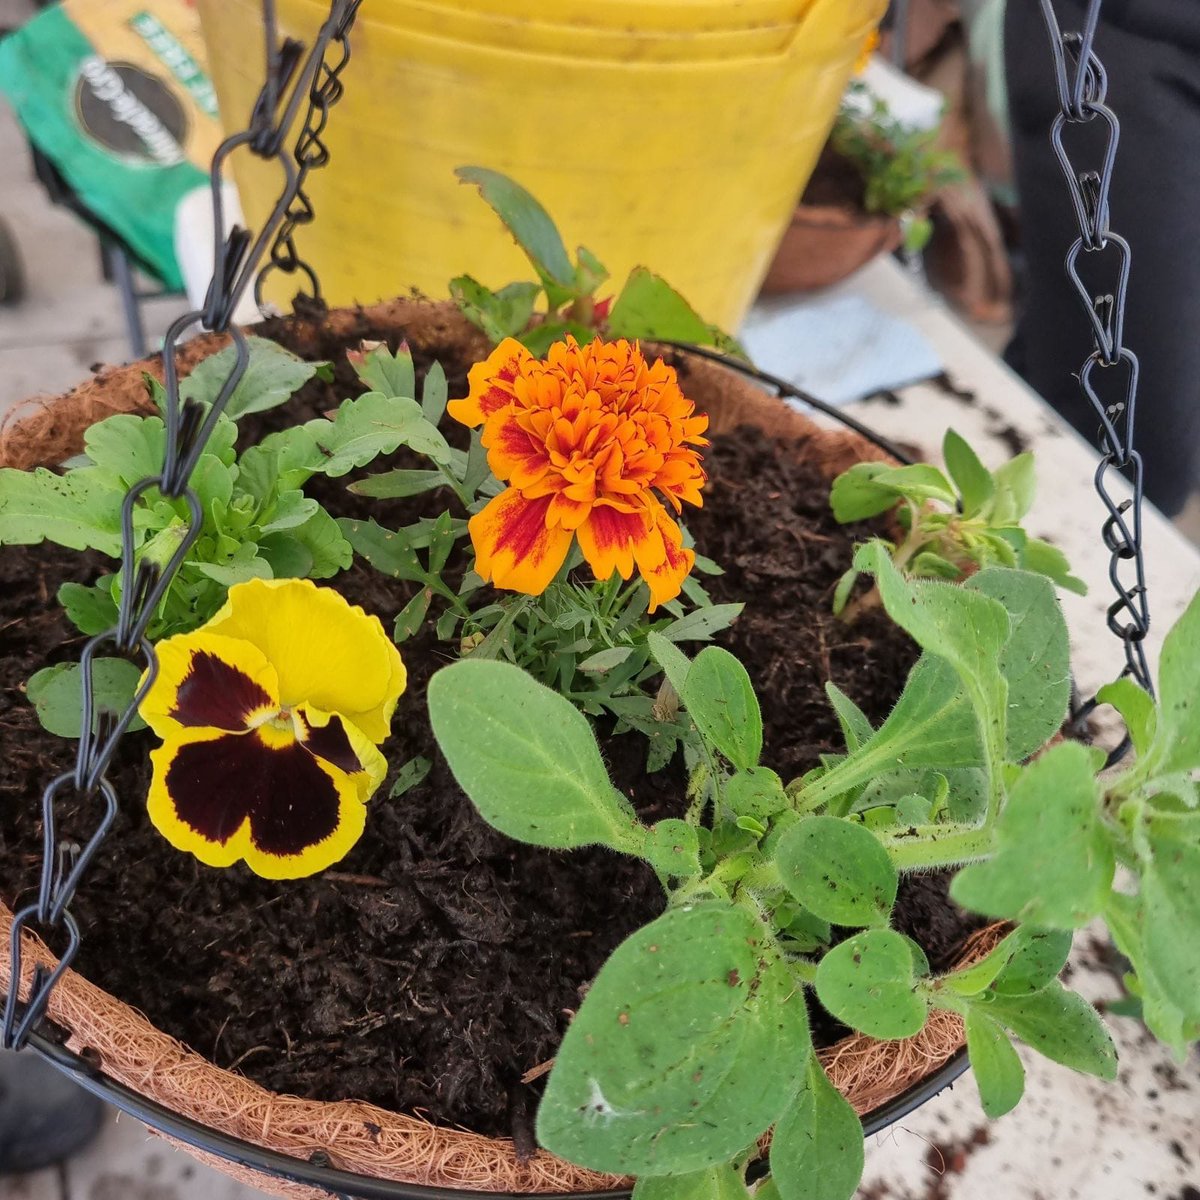 Thanks to Jean & David from No.93’s gardening group for running the hanging basket session today. People really appreciated them. One new visitor said ‘I’ve been feeling down since finishing work but I’ve really enjoyed it & will come back to do other stuff.’ #MomentsForMovement